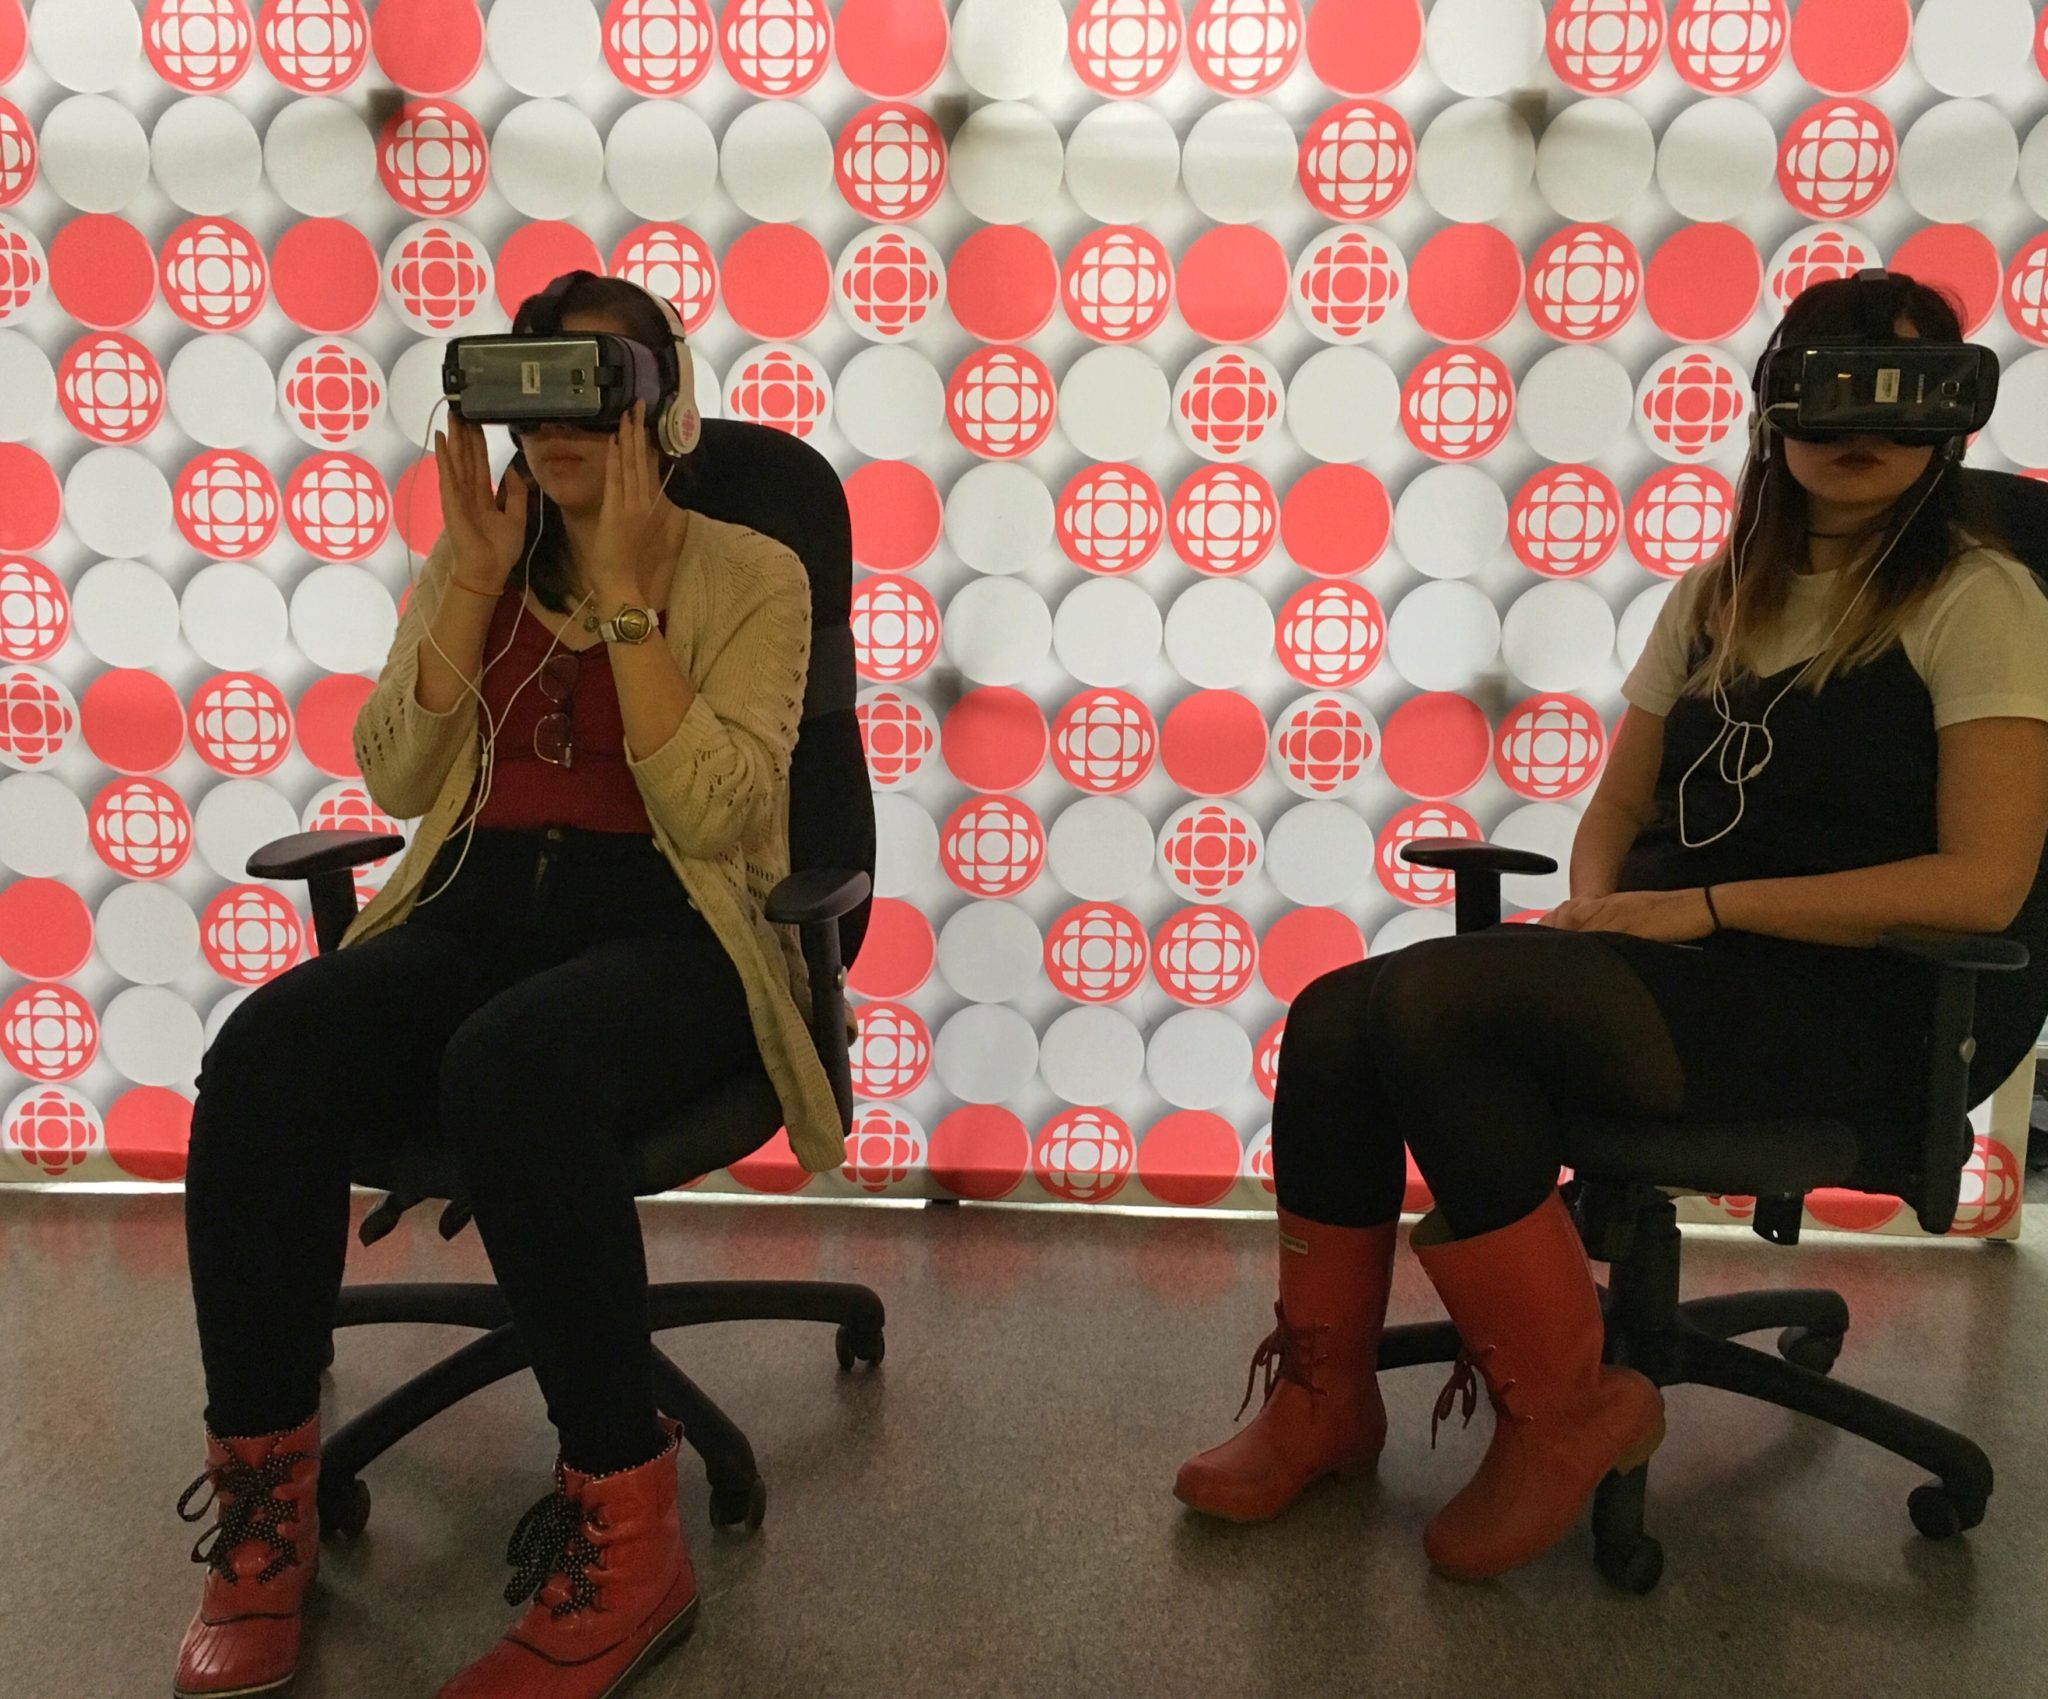 The Quidditch team. Highway of Tears virtual reality documentary